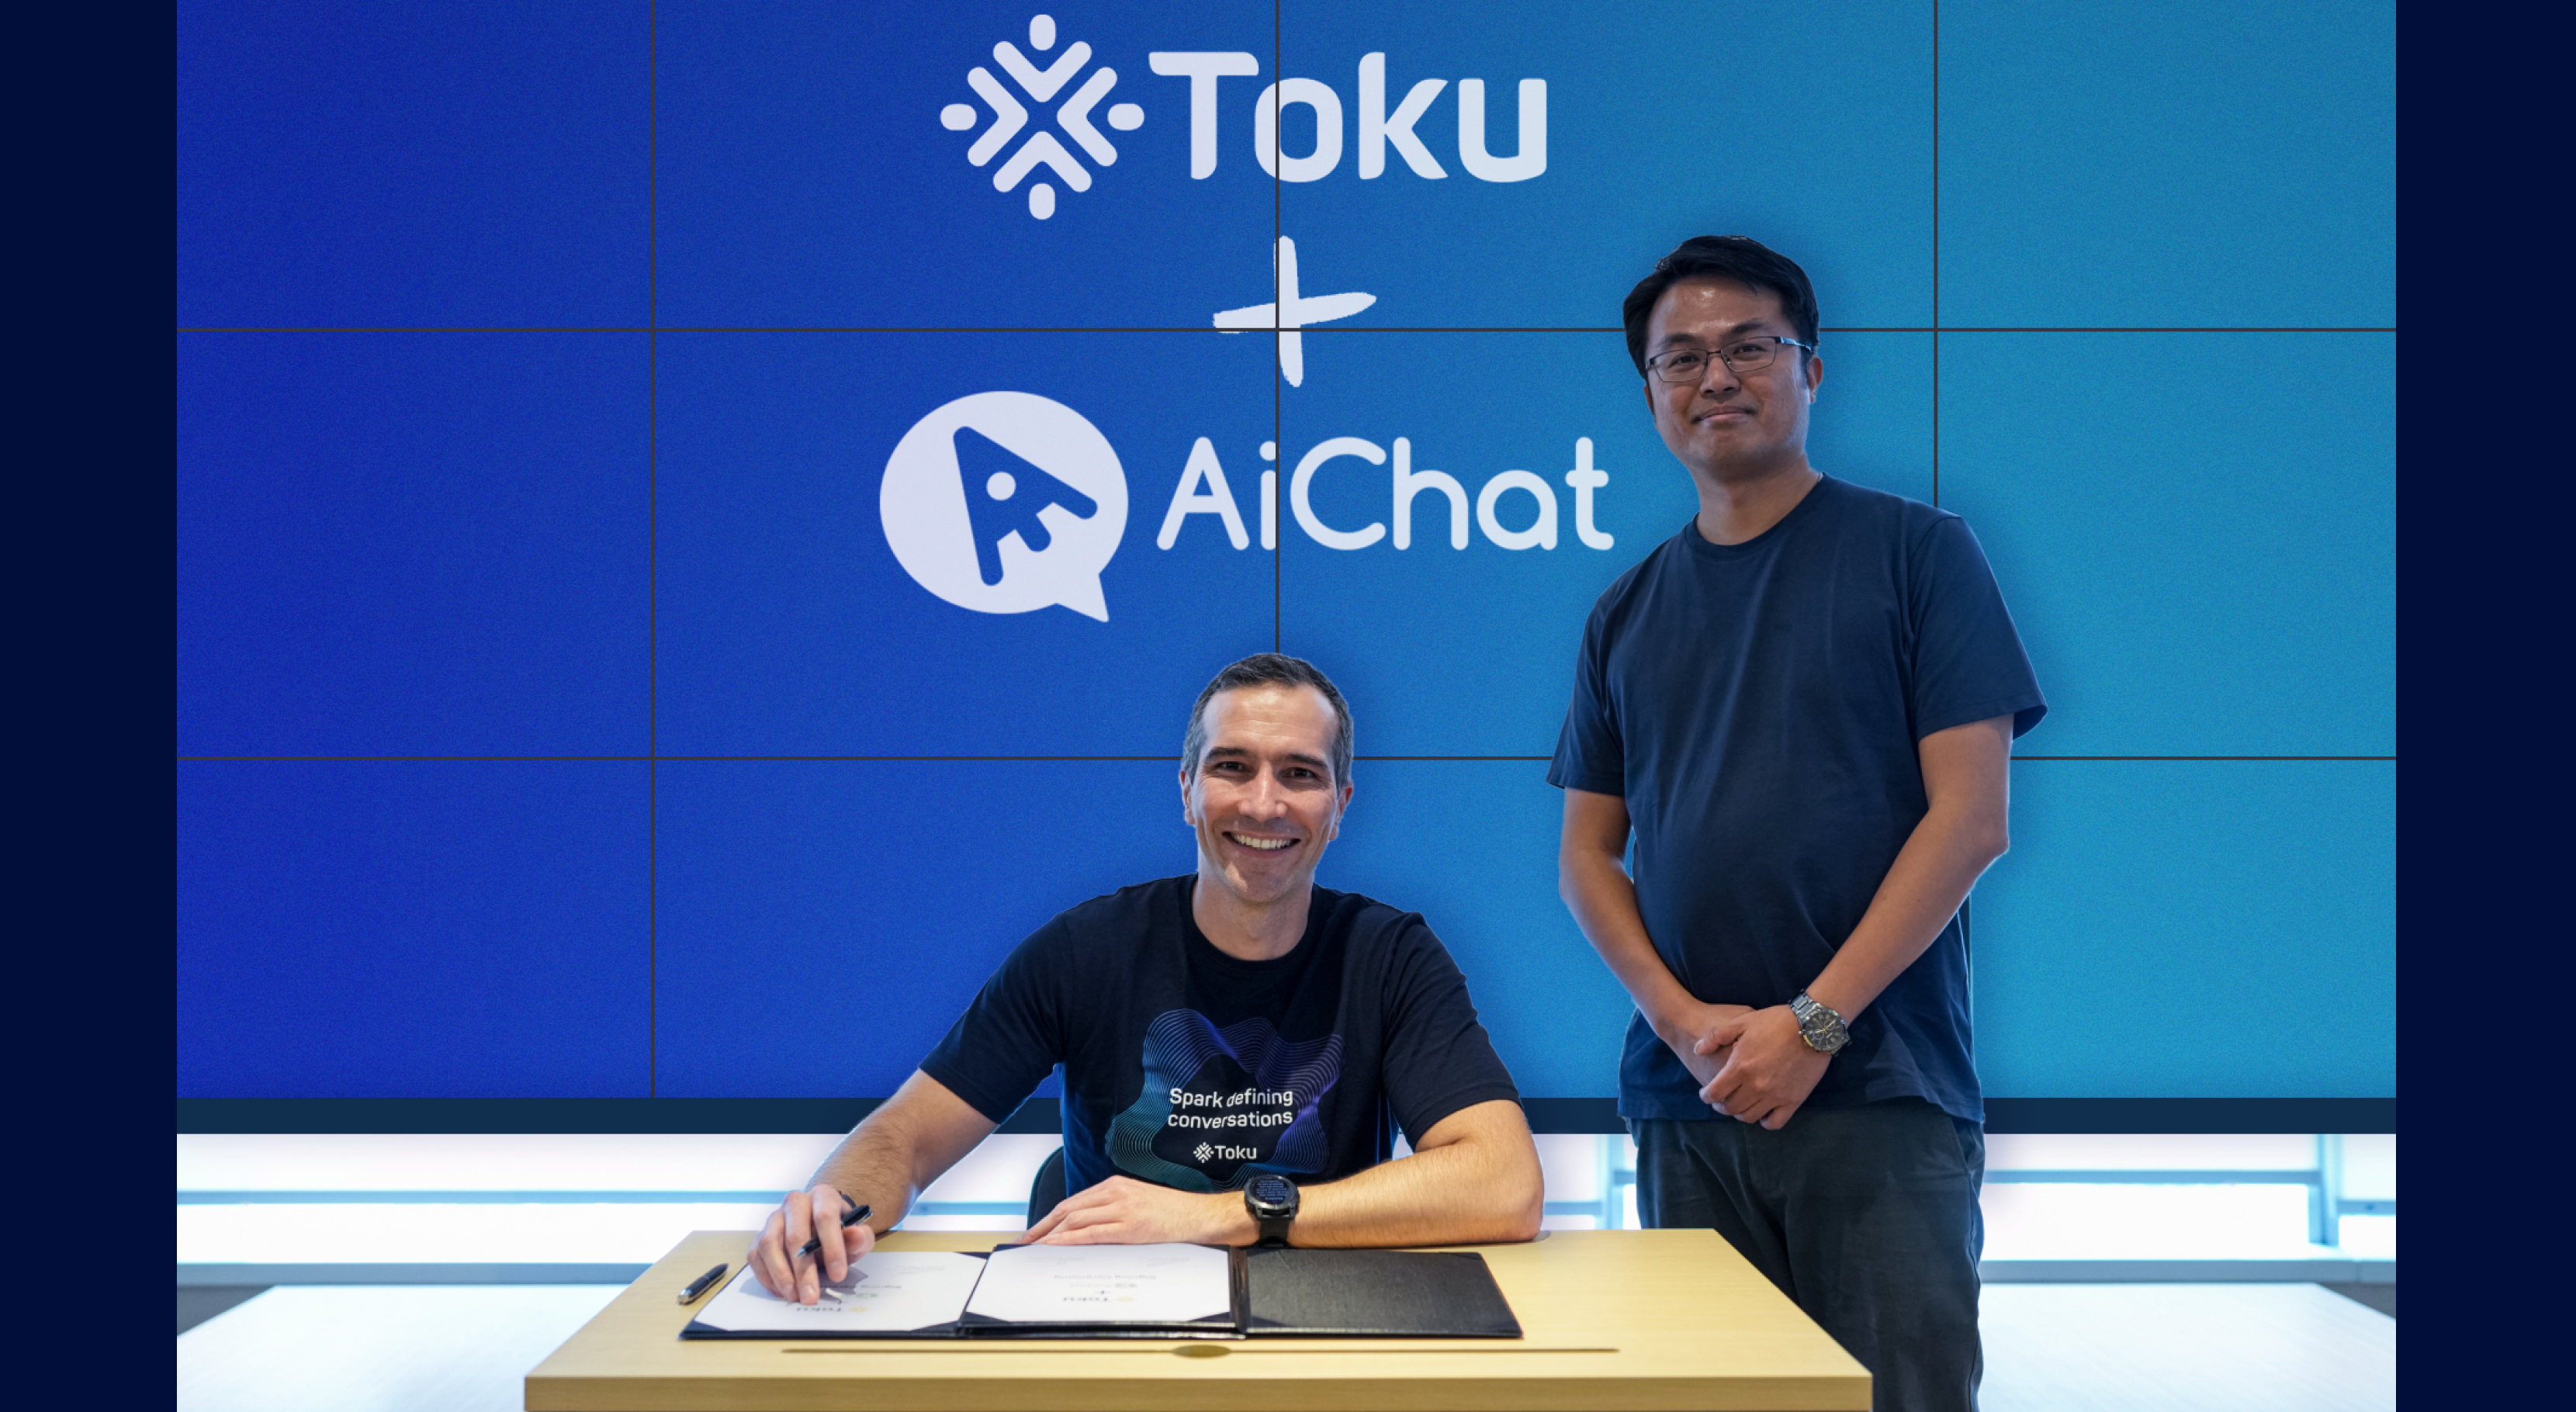 Toku announces intent to acquire AiChat